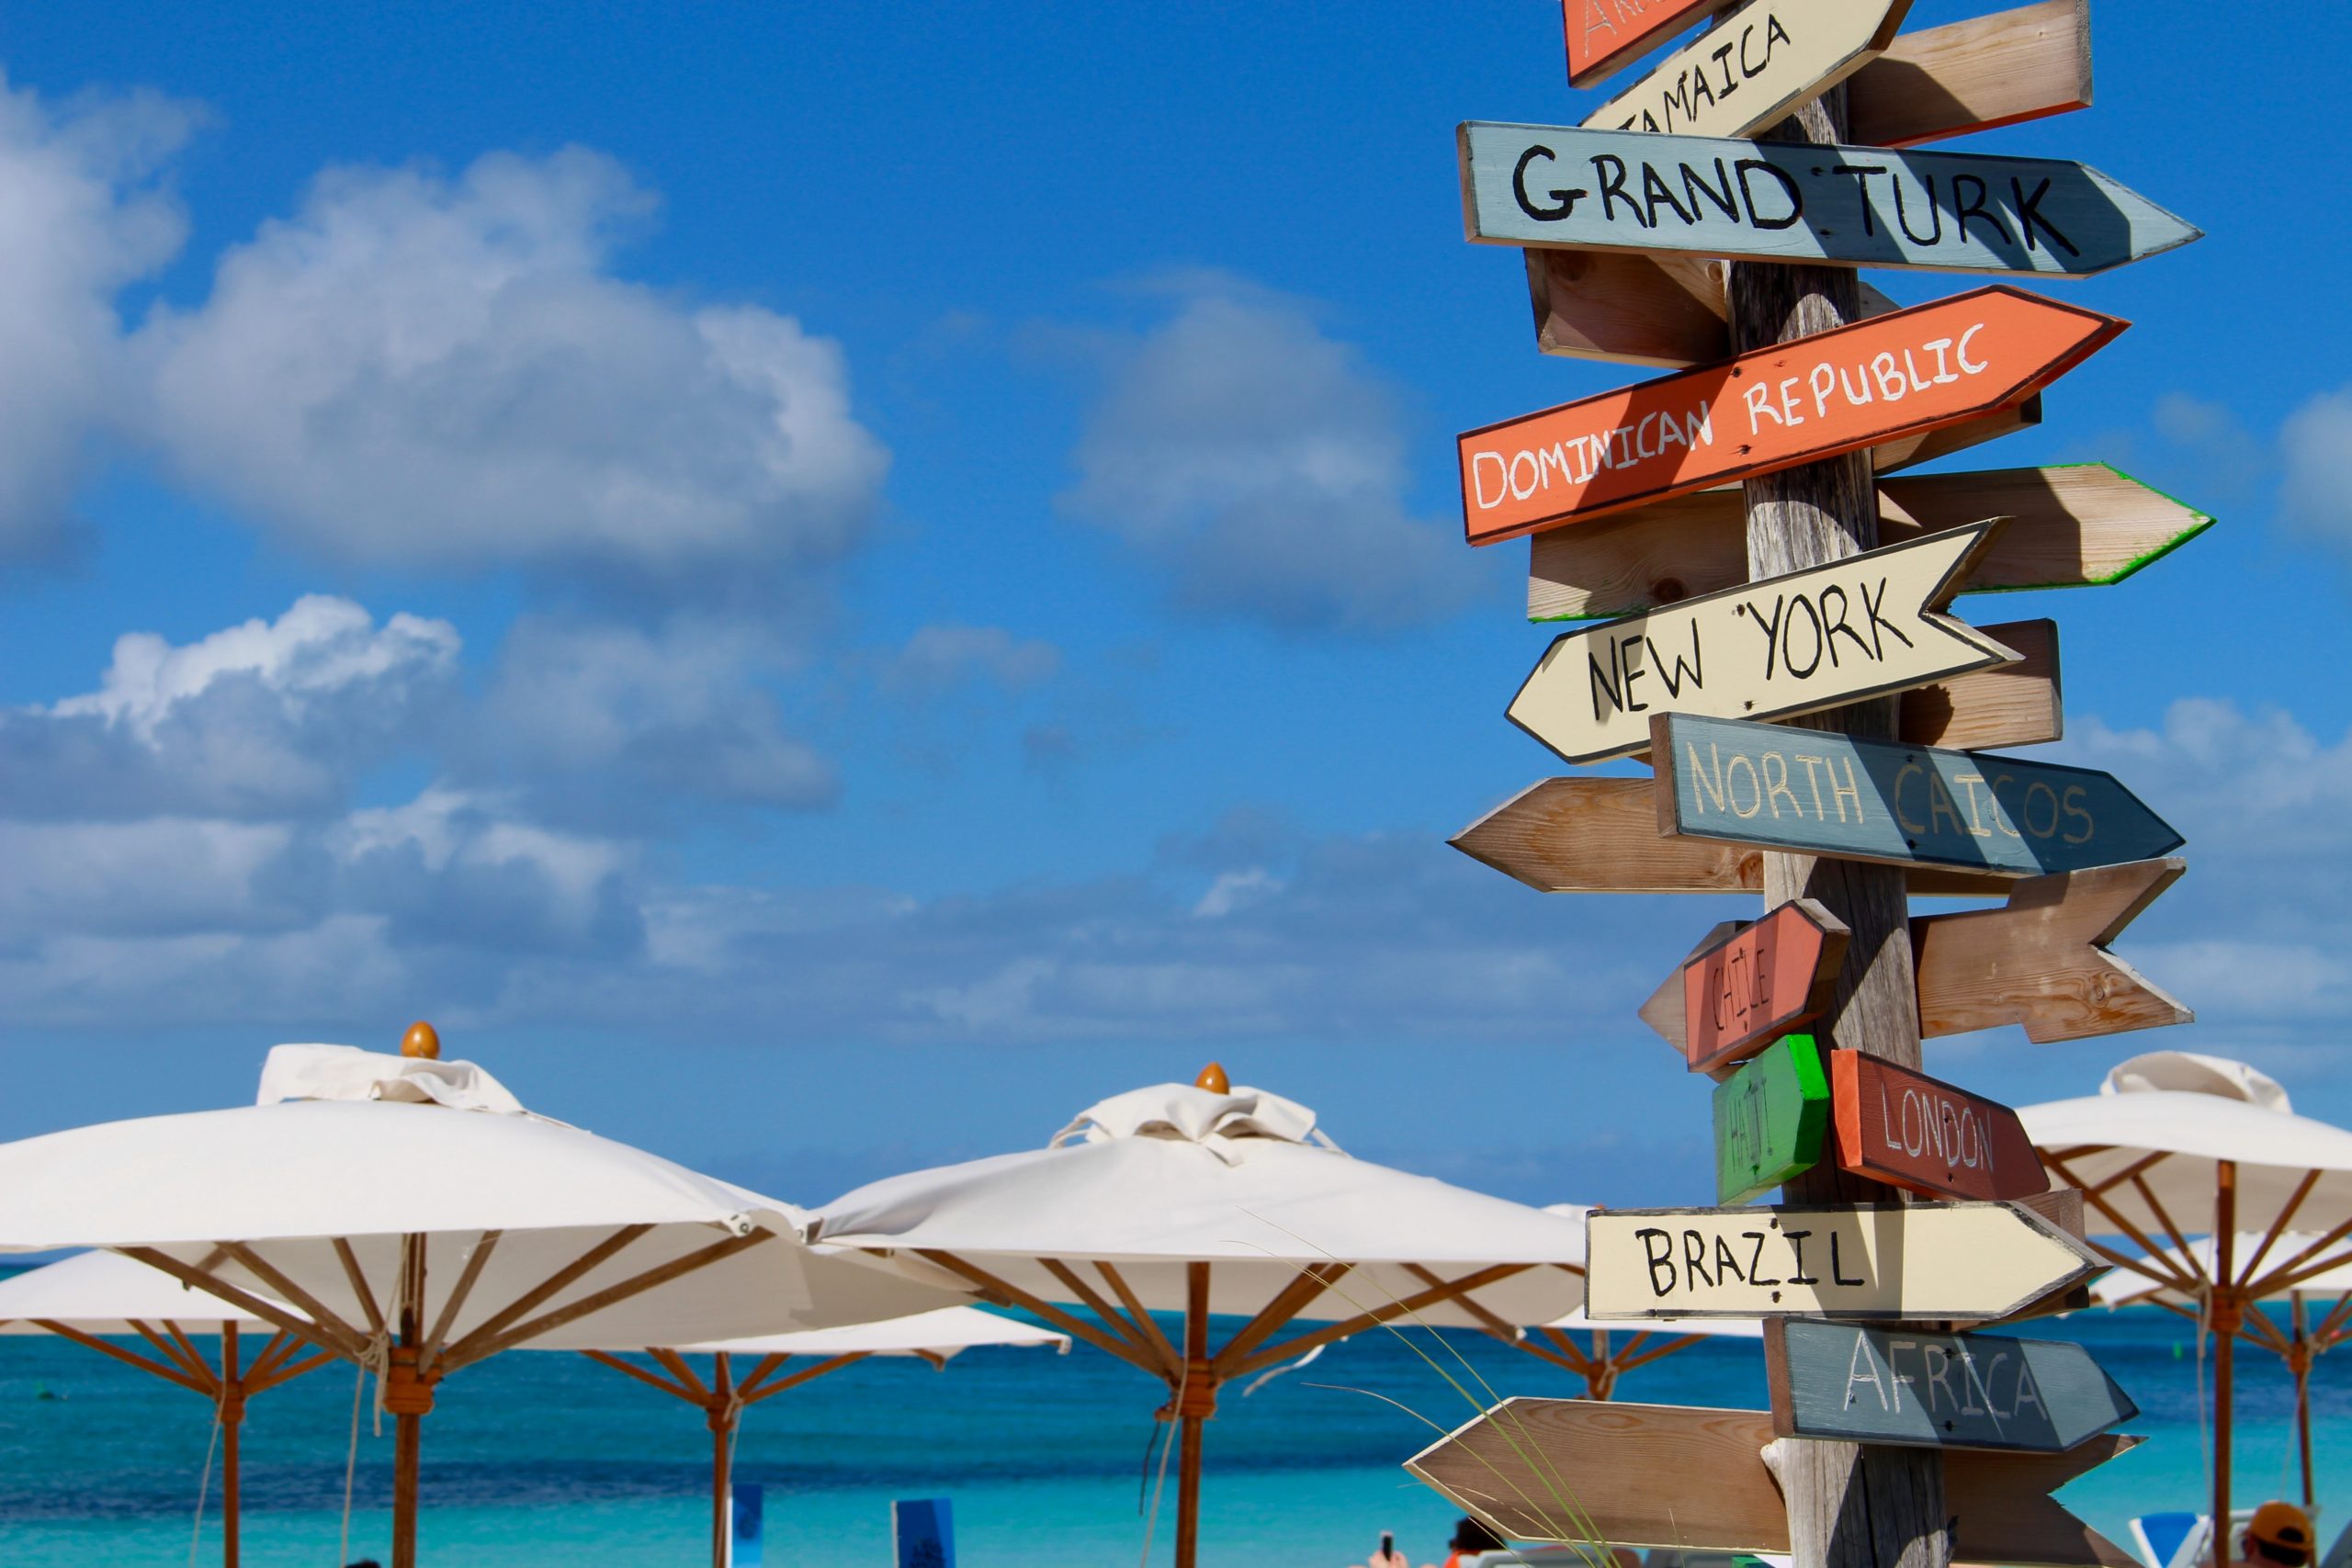 Explore Turks and Caicos Islands from Providenciales